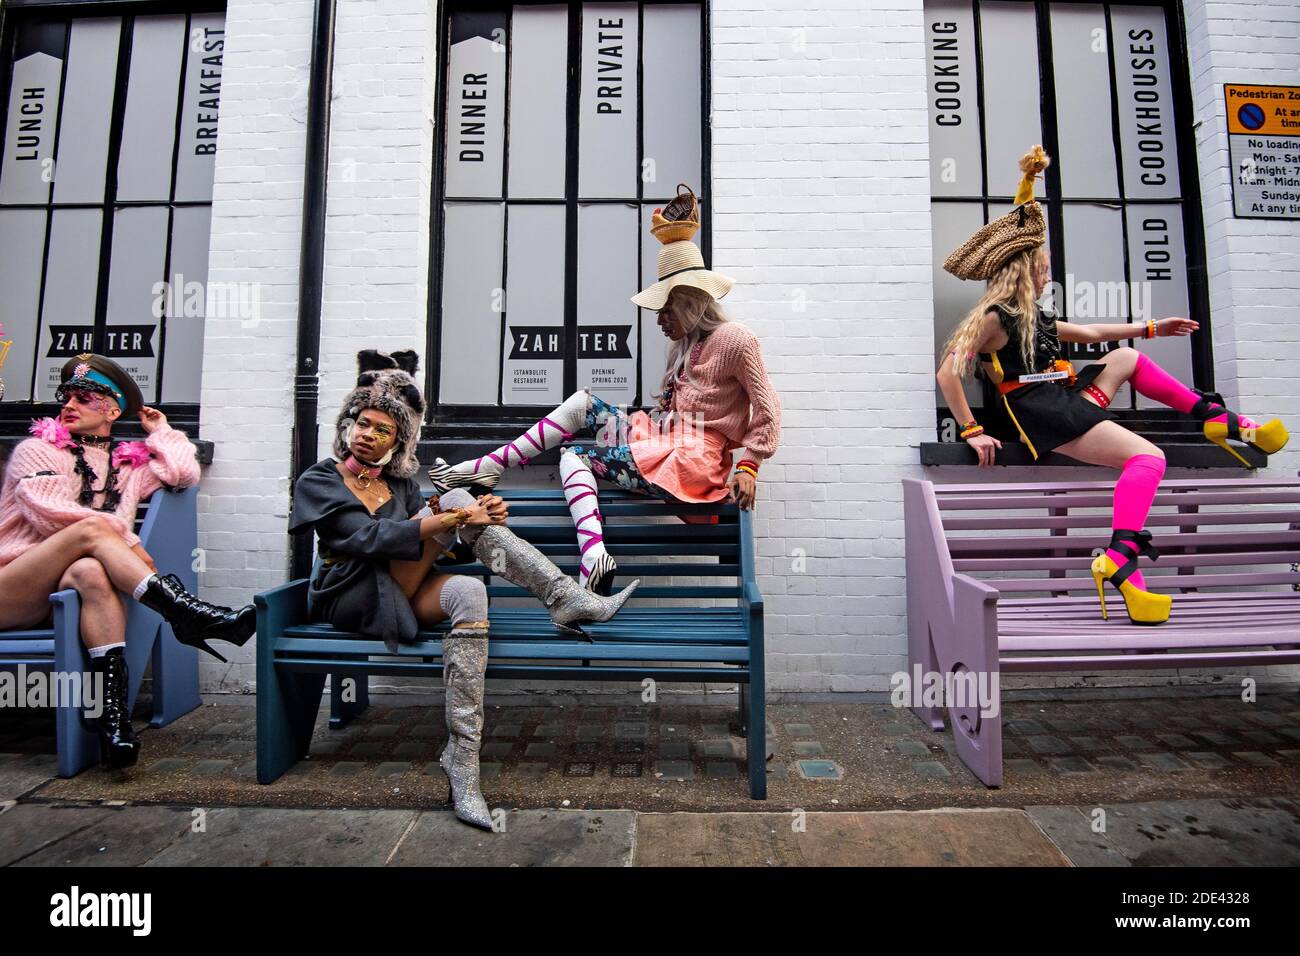 Models pose as they showcase clothes by fashion designer Pierre Garroudi during a flashmob fashion shoot on Carnaby Street, London. Stock Photo